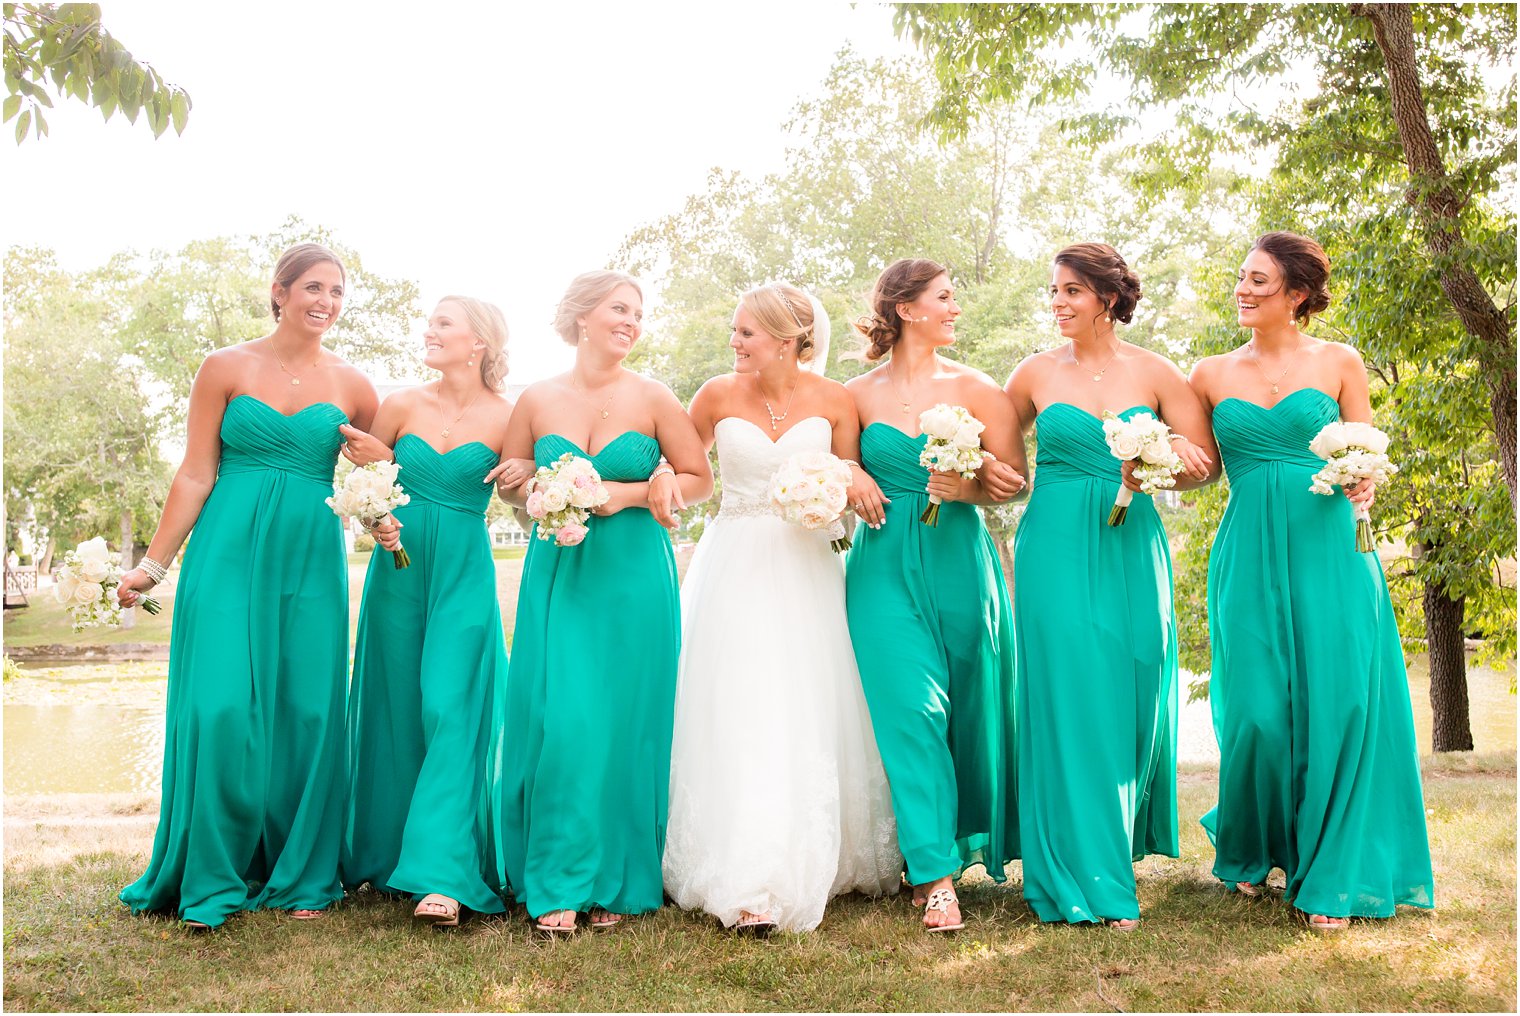 The Sunset Ballroom at Jack Baker's Lobster Shanty Wedding | Bridesmaids in turquoise